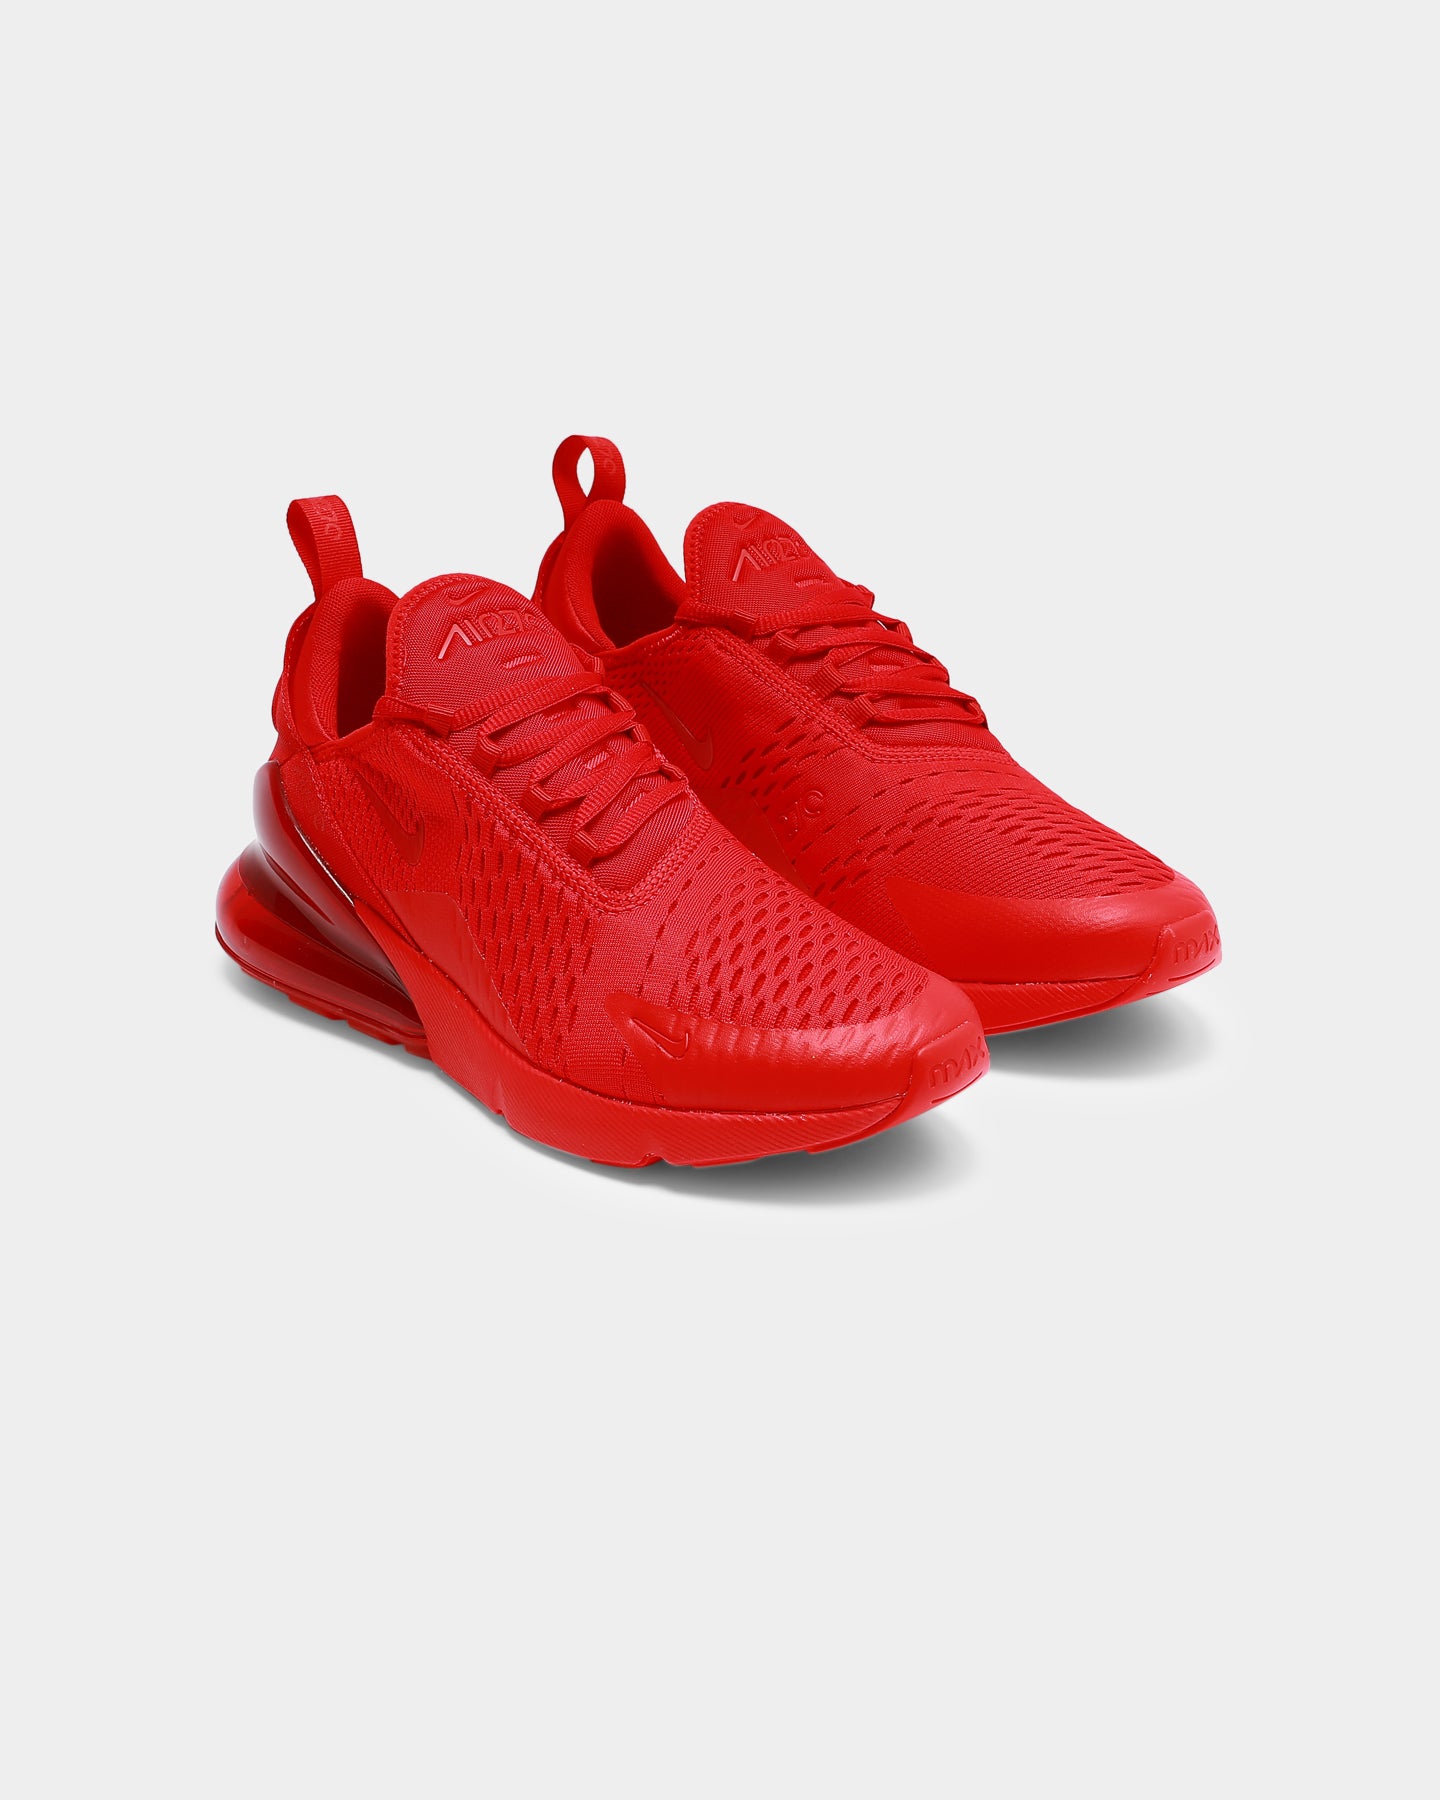 red nike 270s